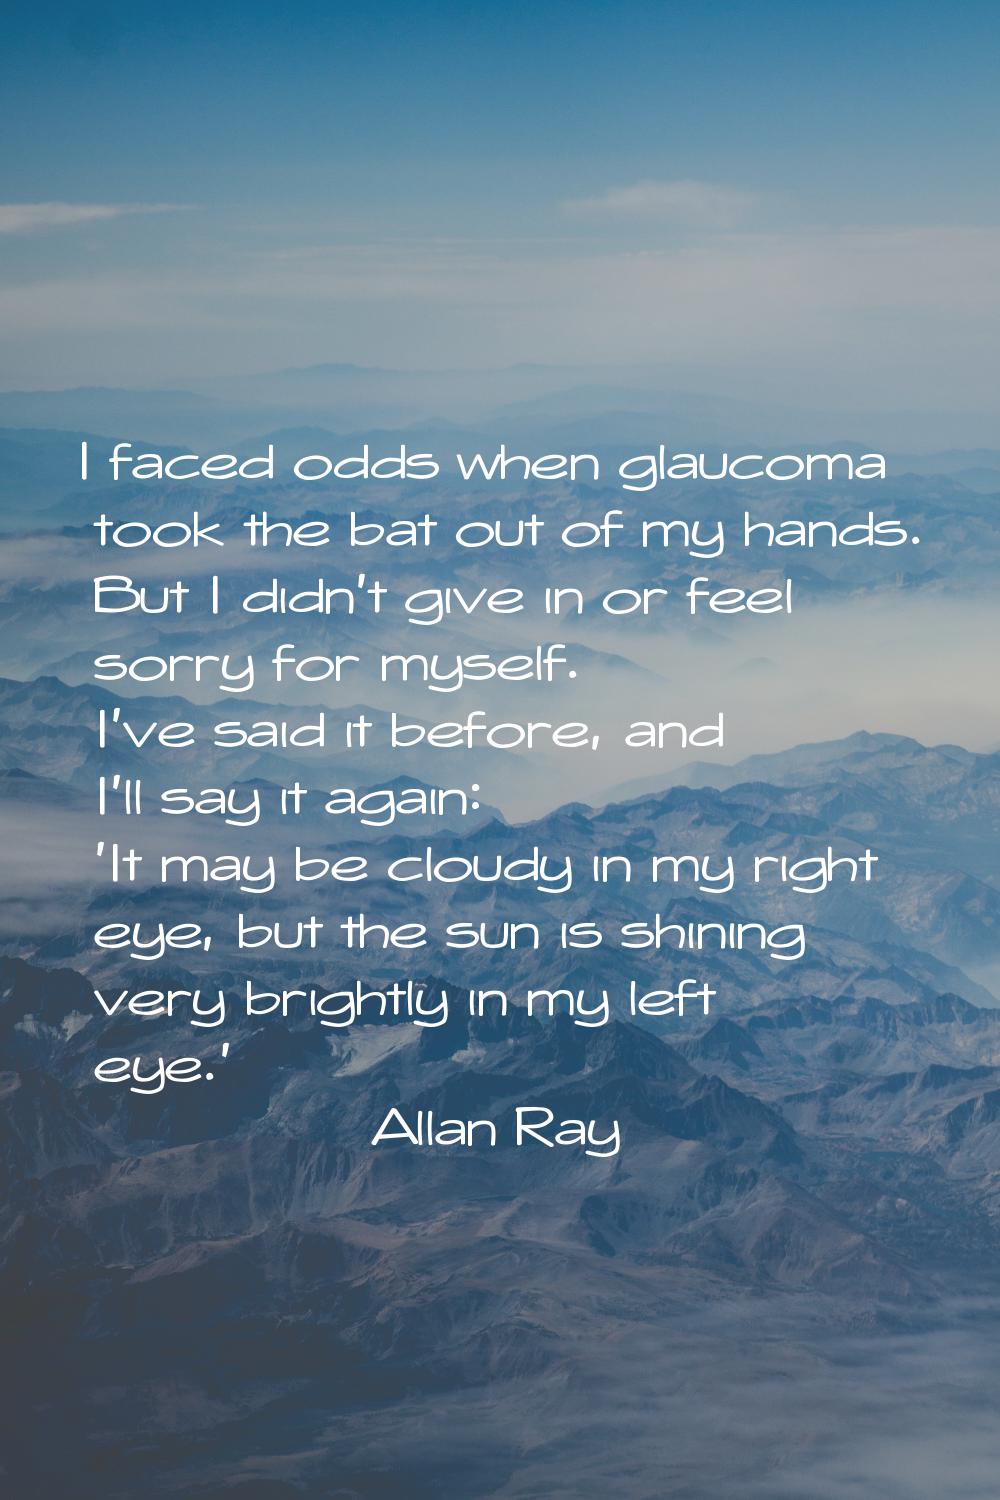 I faced odds when glaucoma took the bat out of my hands. But I didn't give in or feel sorry for mys